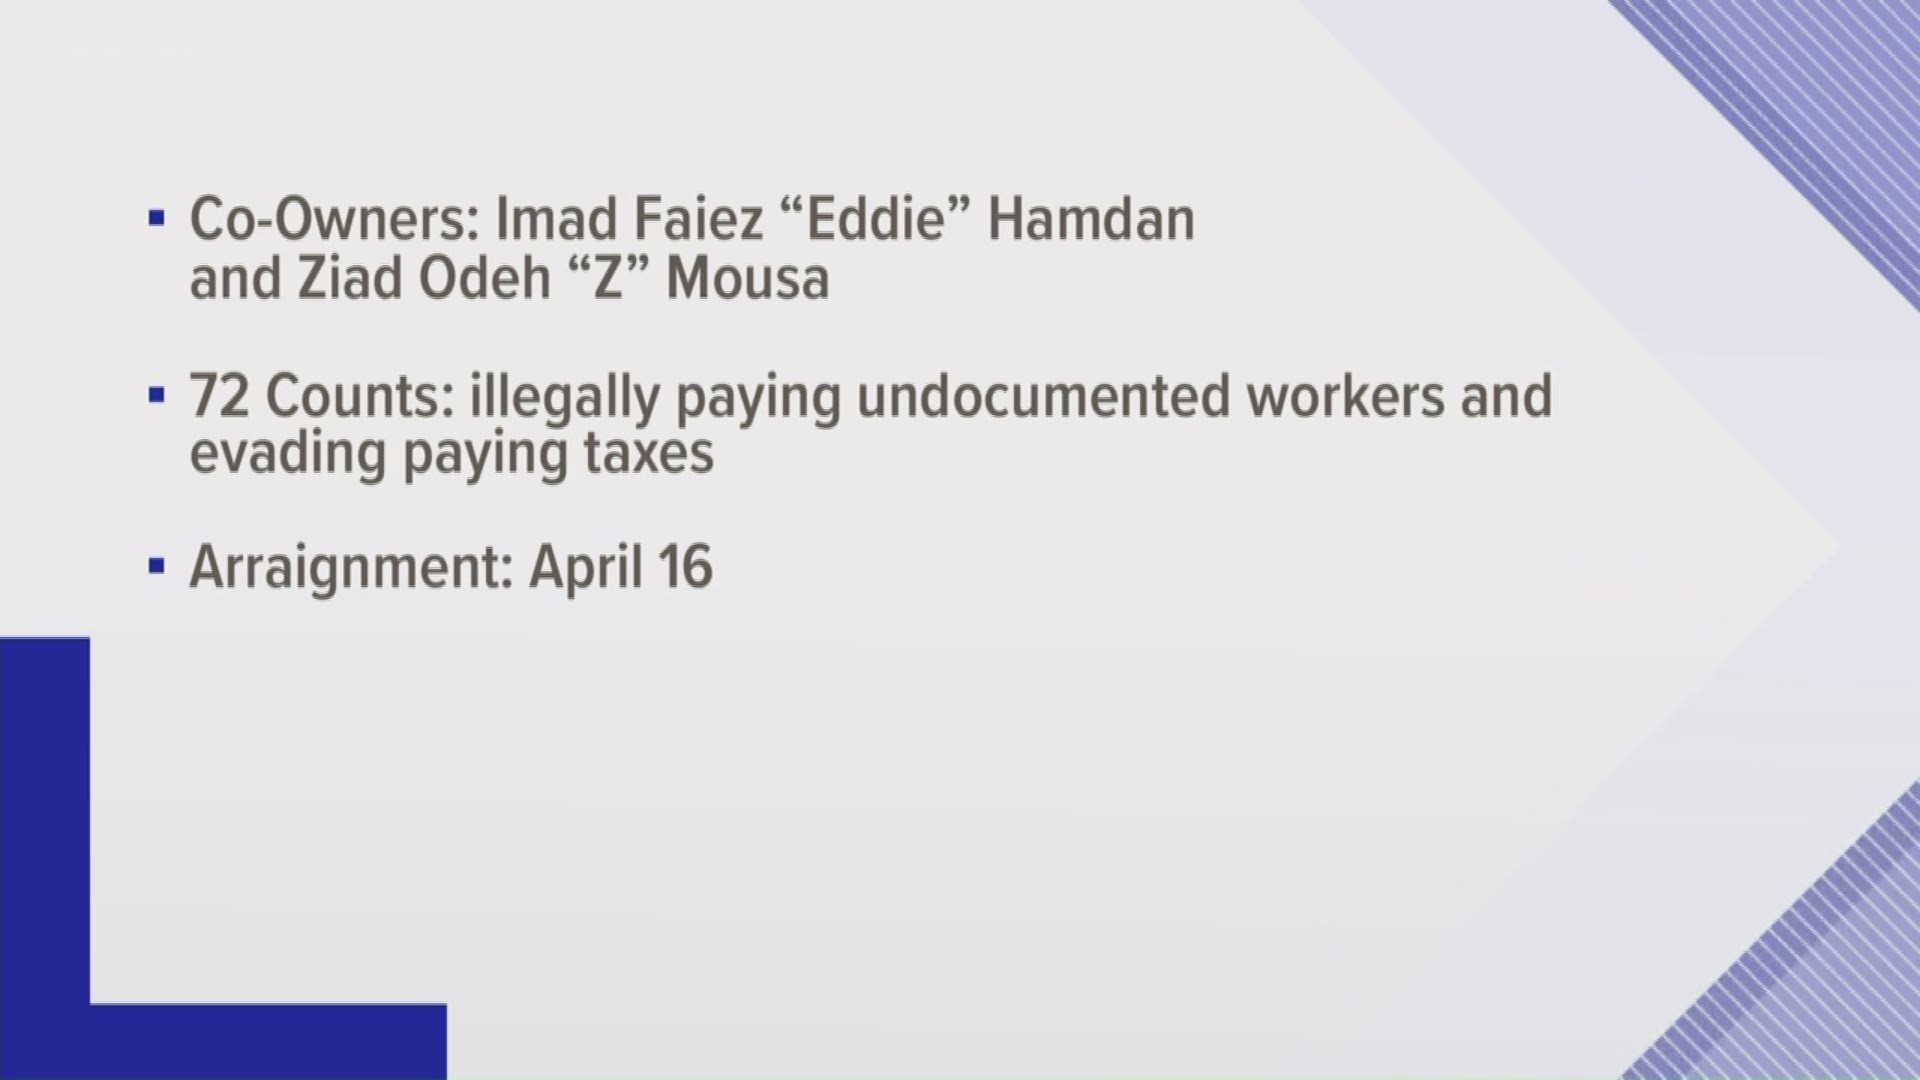 Federal prosecutors claim the co-owners of Louisiana's Brothers Food Mart chain have unlawfully employed illegal immigrants and evaded paying taxes.